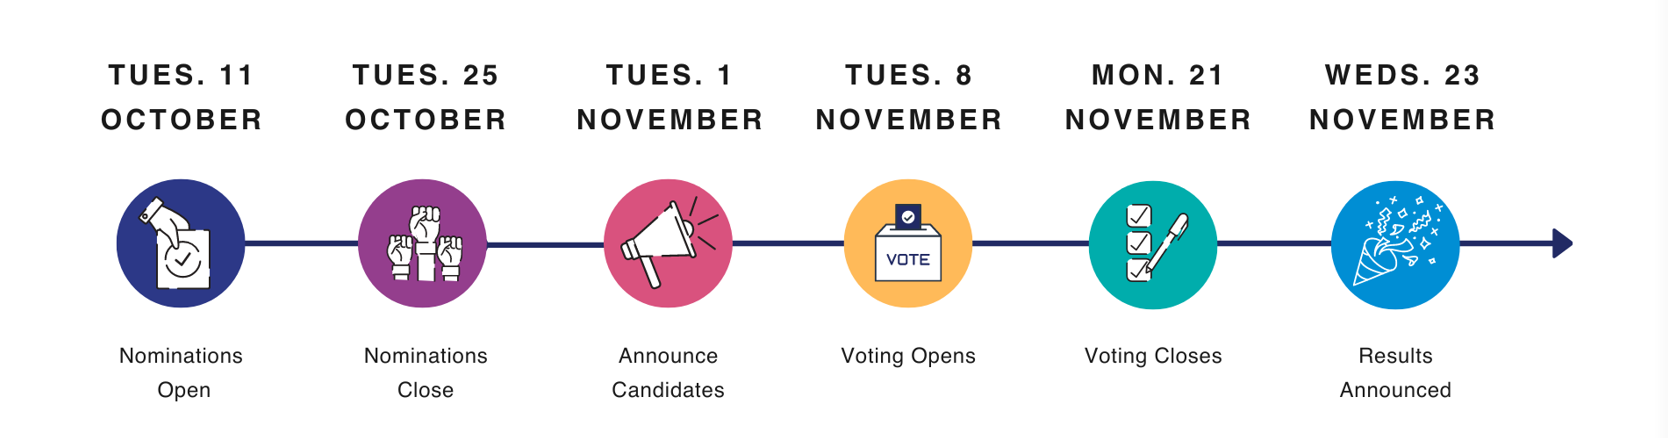 A timeline of important dates for election. Tuesday 11 October nominations open. Tuesday 25 October Nominations close. Tuesday 1 November Candidates Announced. Tuesday 8 November Voting Opens. Monday 21 November voting closes. Wednesday 23 November, Results announced.